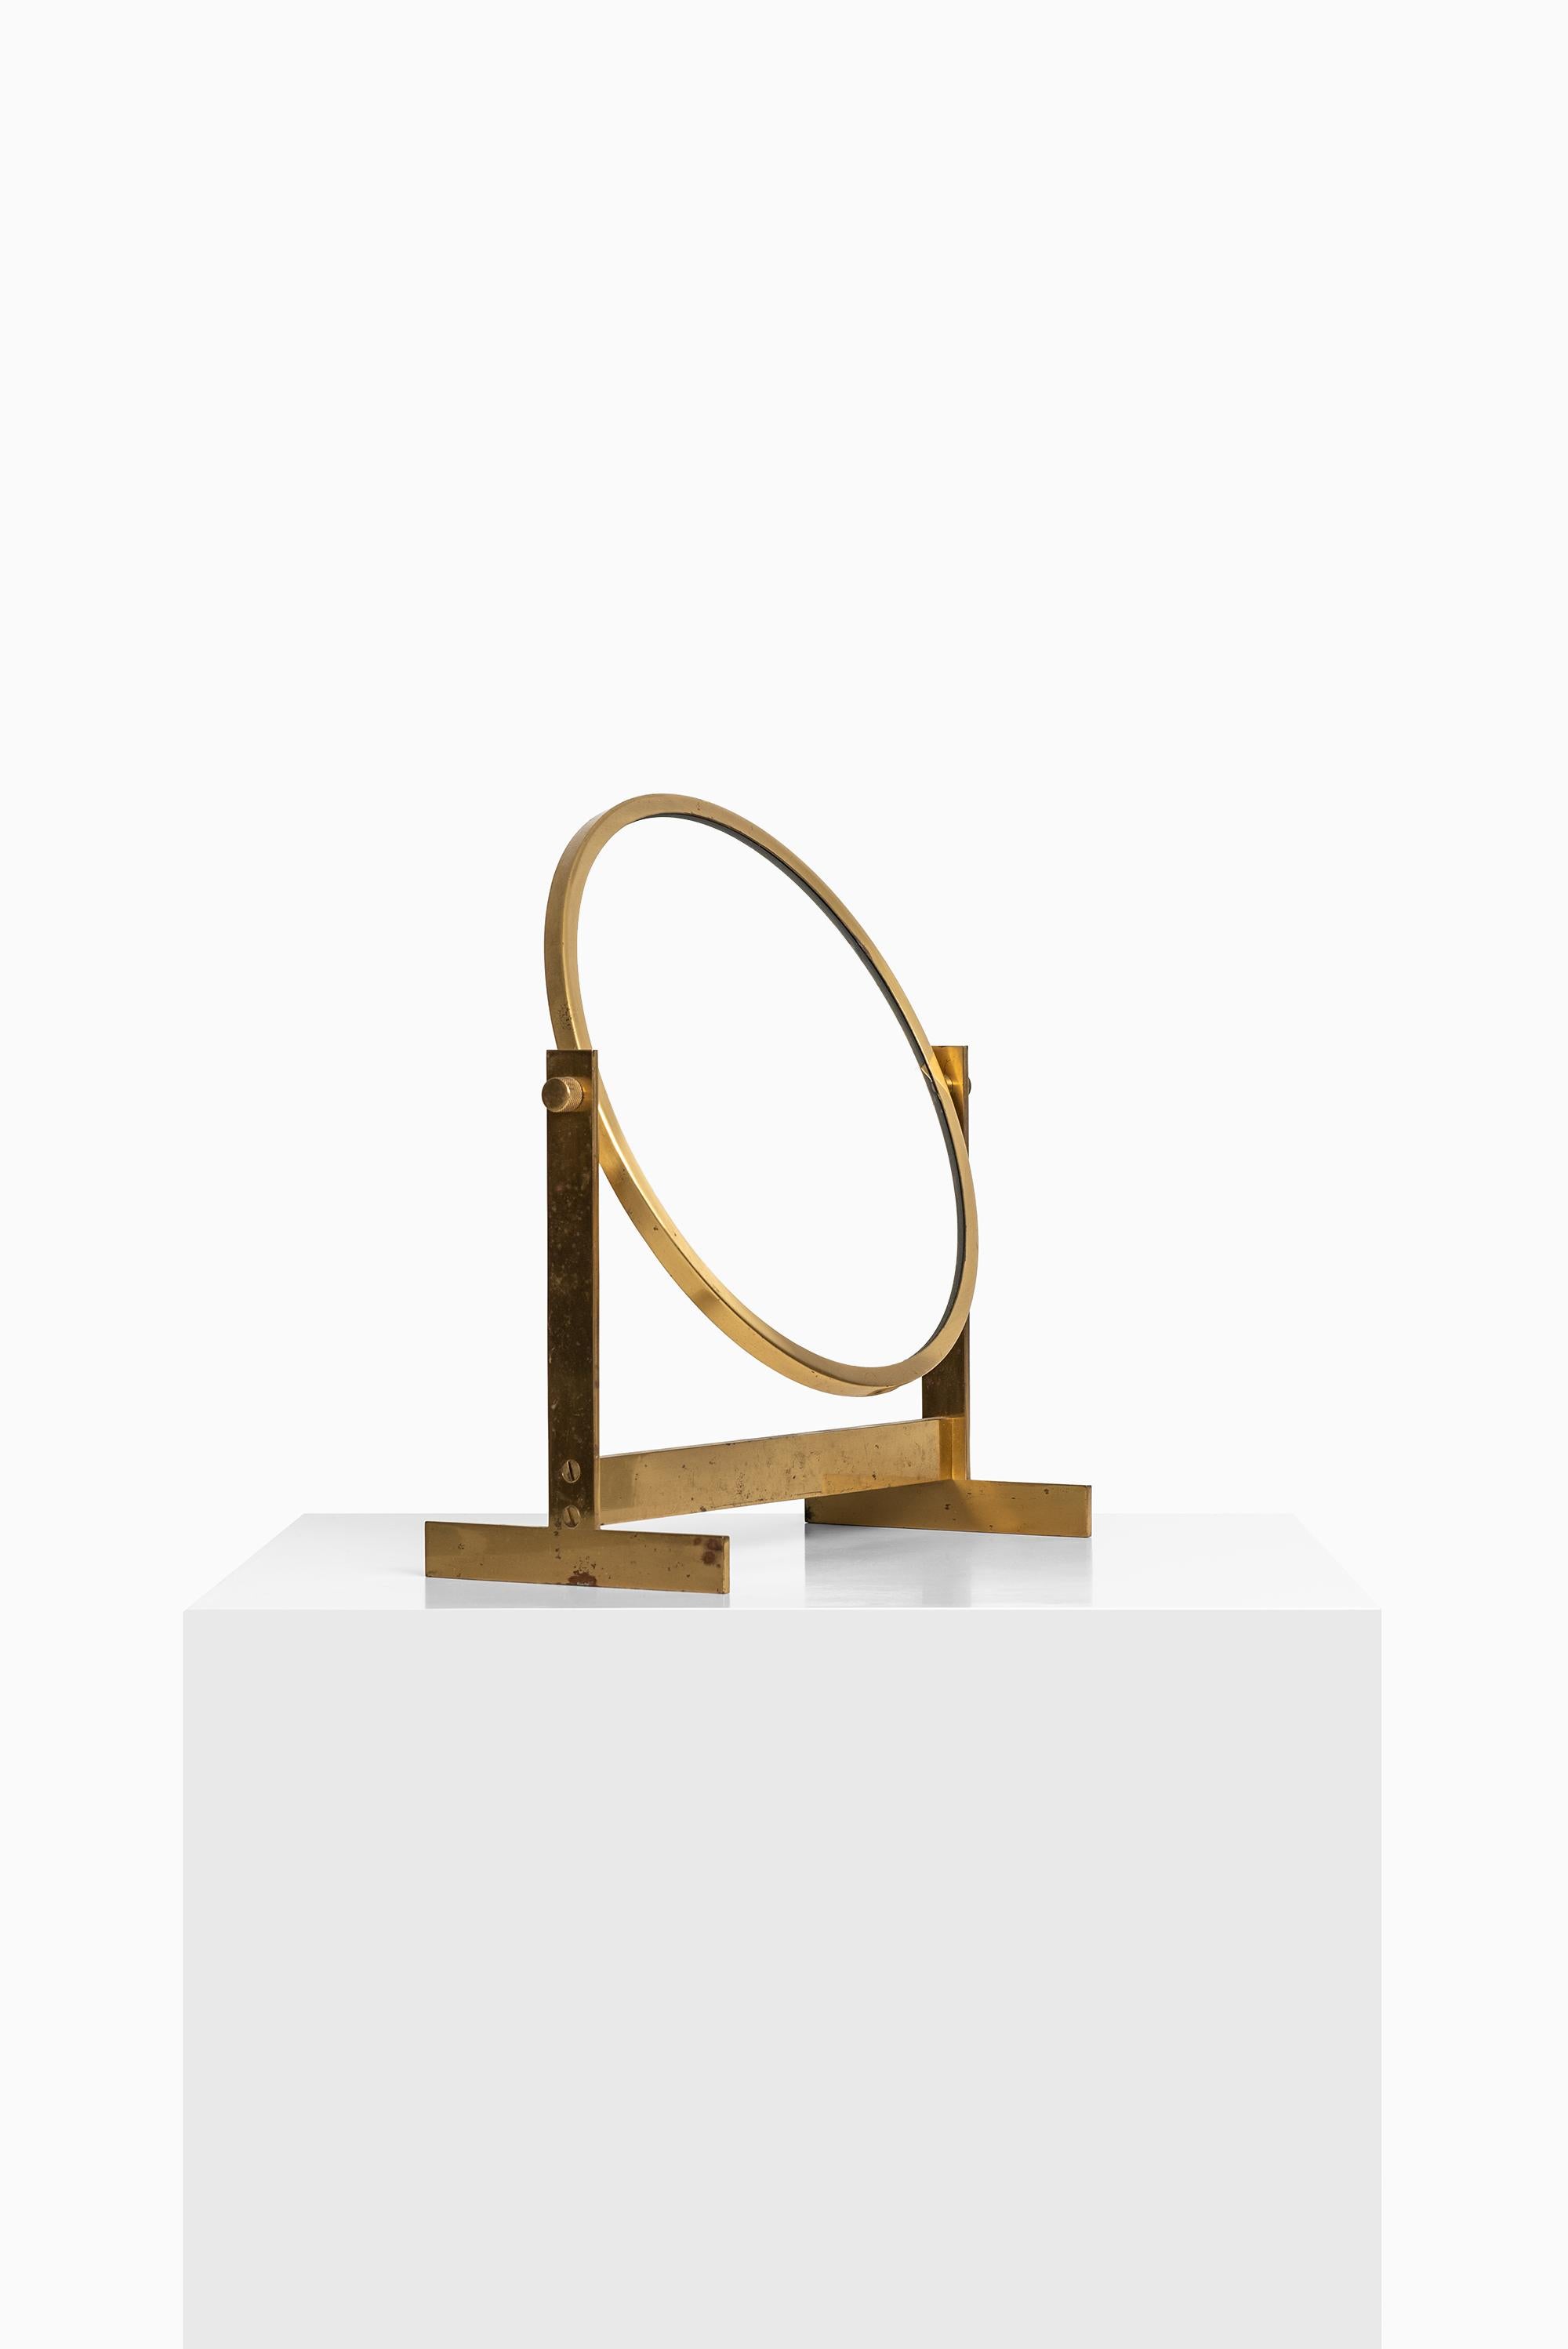 Rare table mirror in brass produced in Sweden.